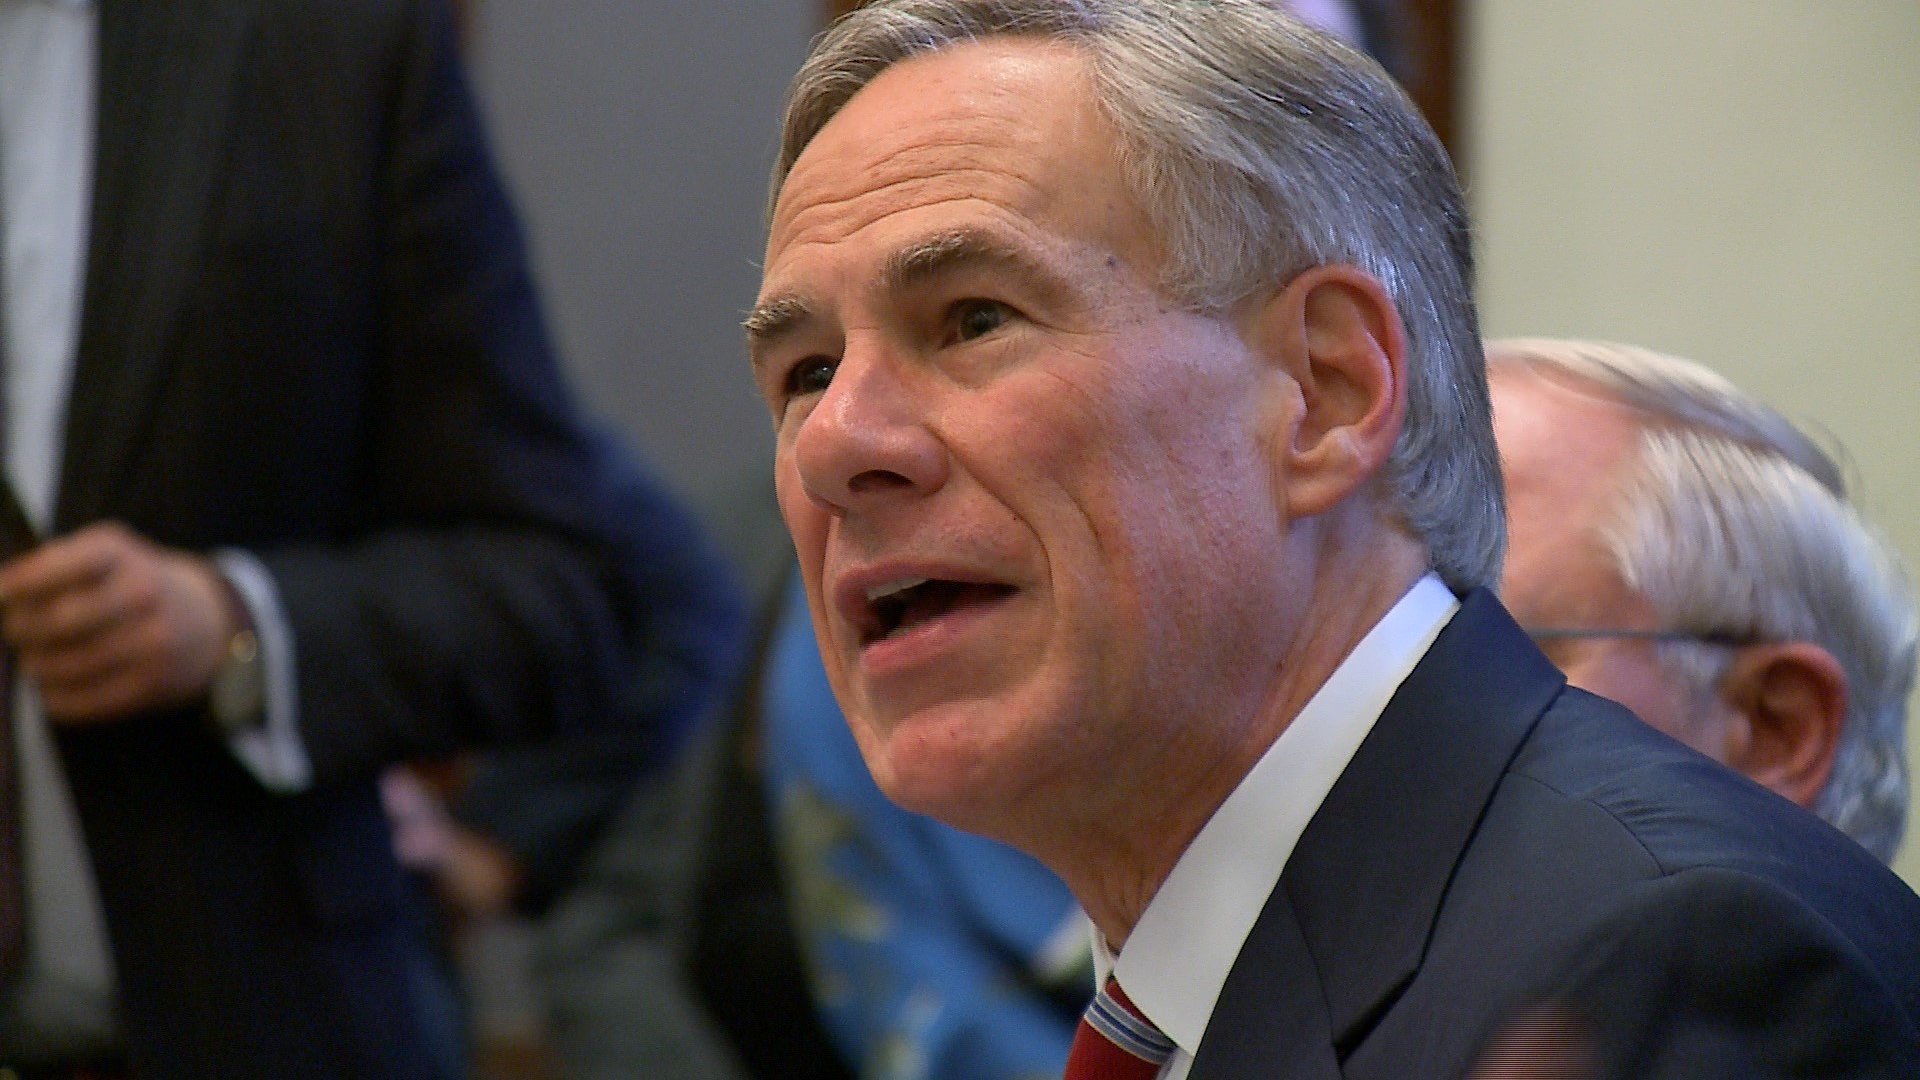 Gov. Greg Abbott spoke Monday about how the state can move forward with re-opening during the coronavirus pandemic.